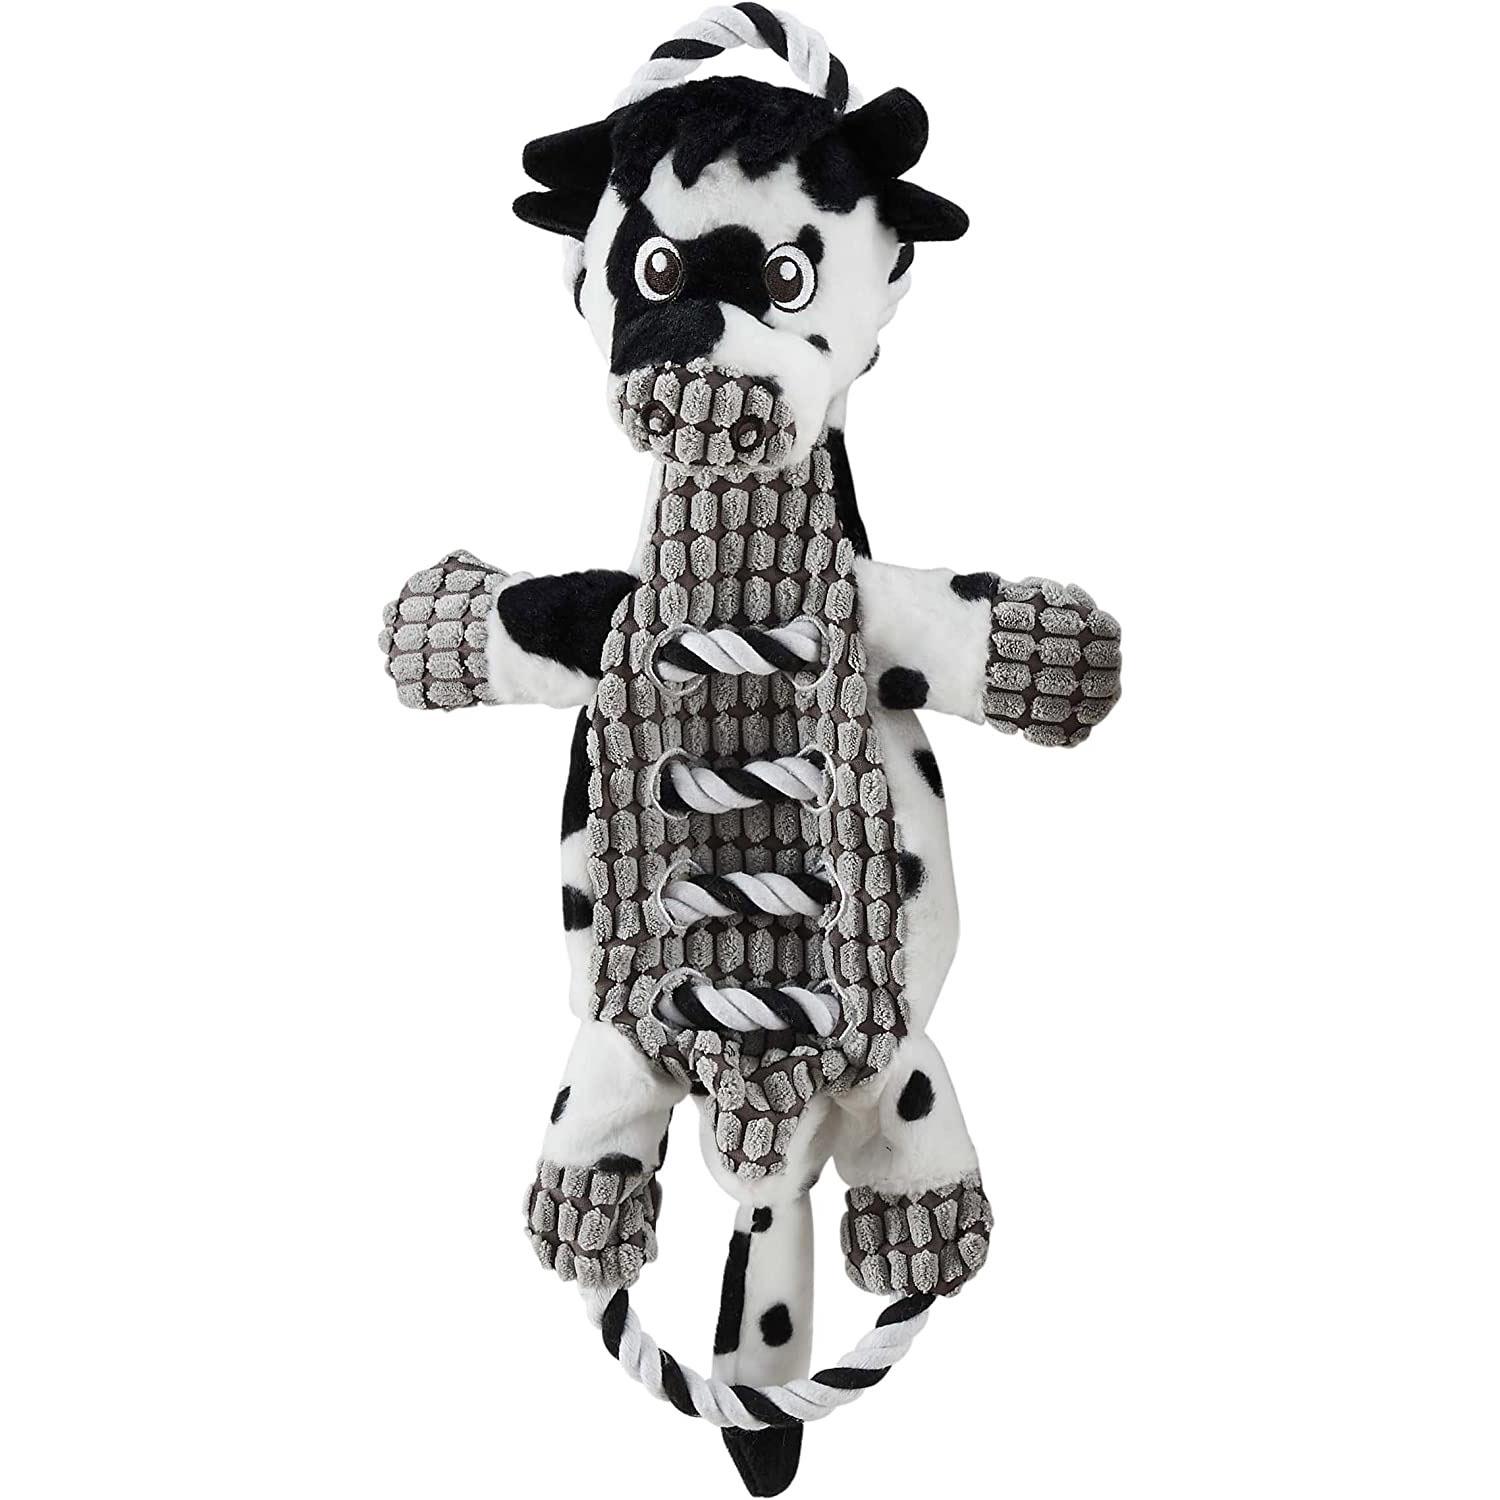 Charming Pet Ropes-A-Go-Go Cow Squeaky Plush Dog Toy for $6.46